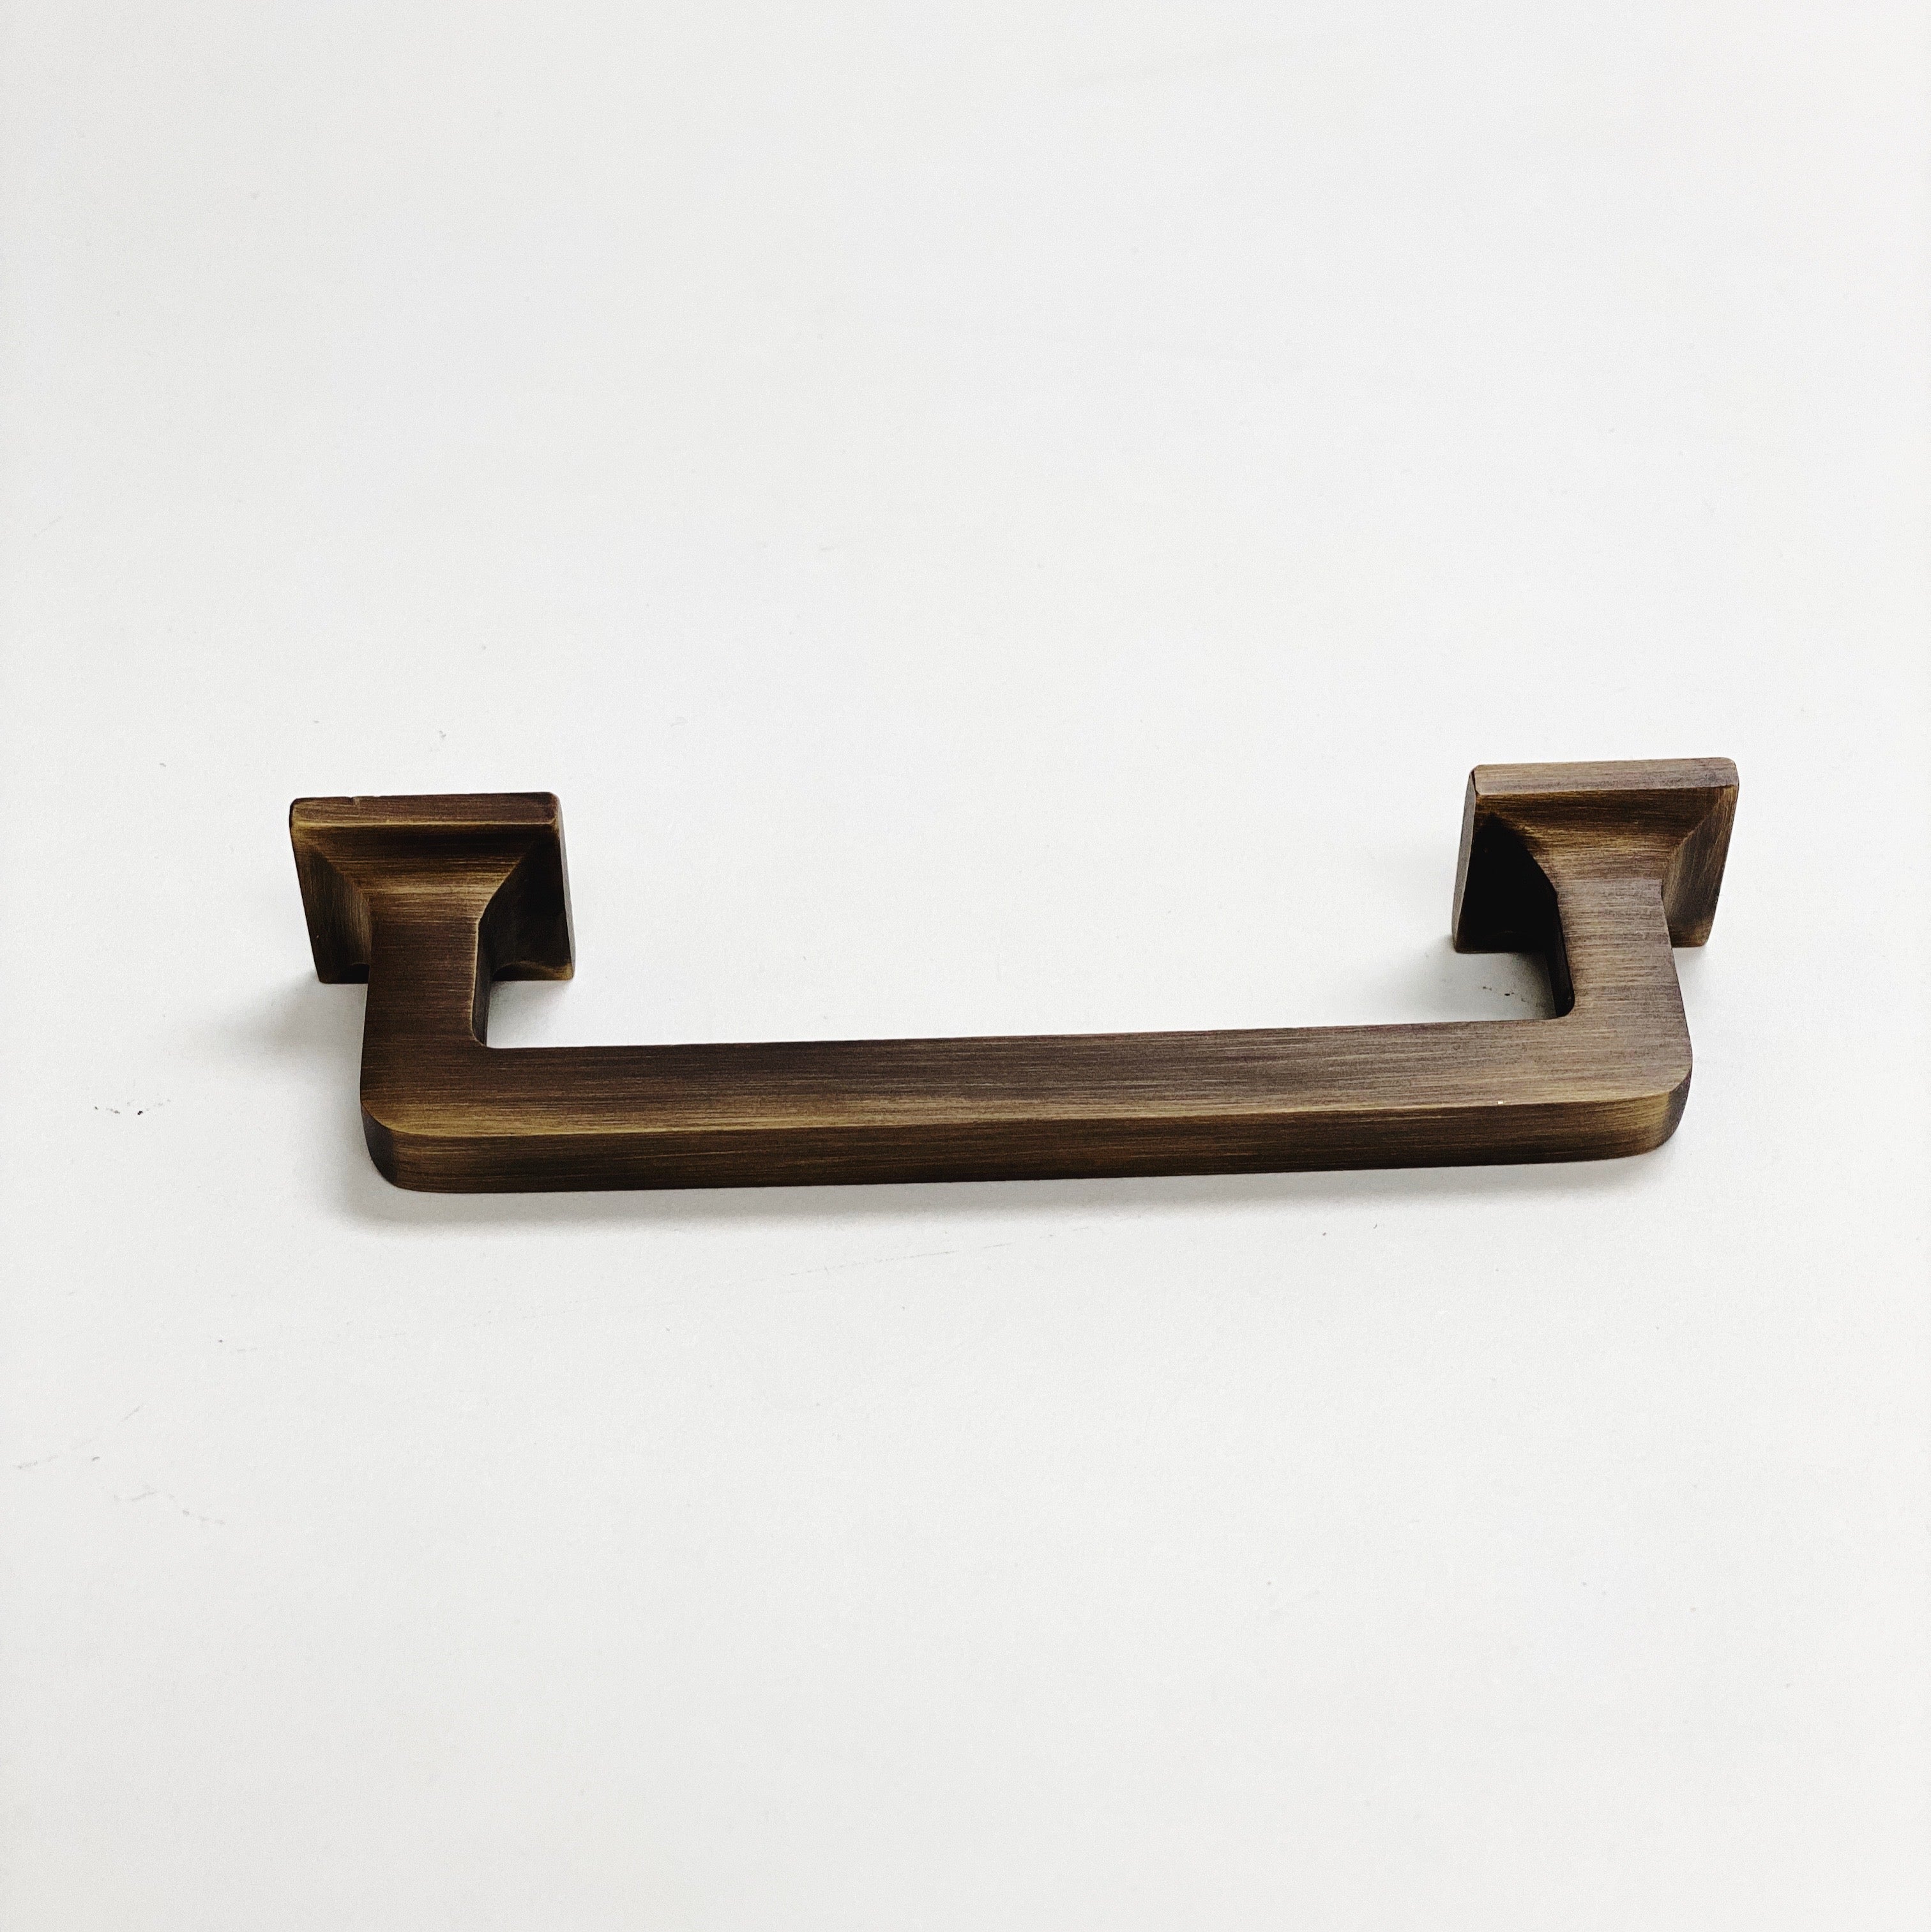 Eloise Antique Brass Mission Style Drawer Pull - Forge Hardware Studio